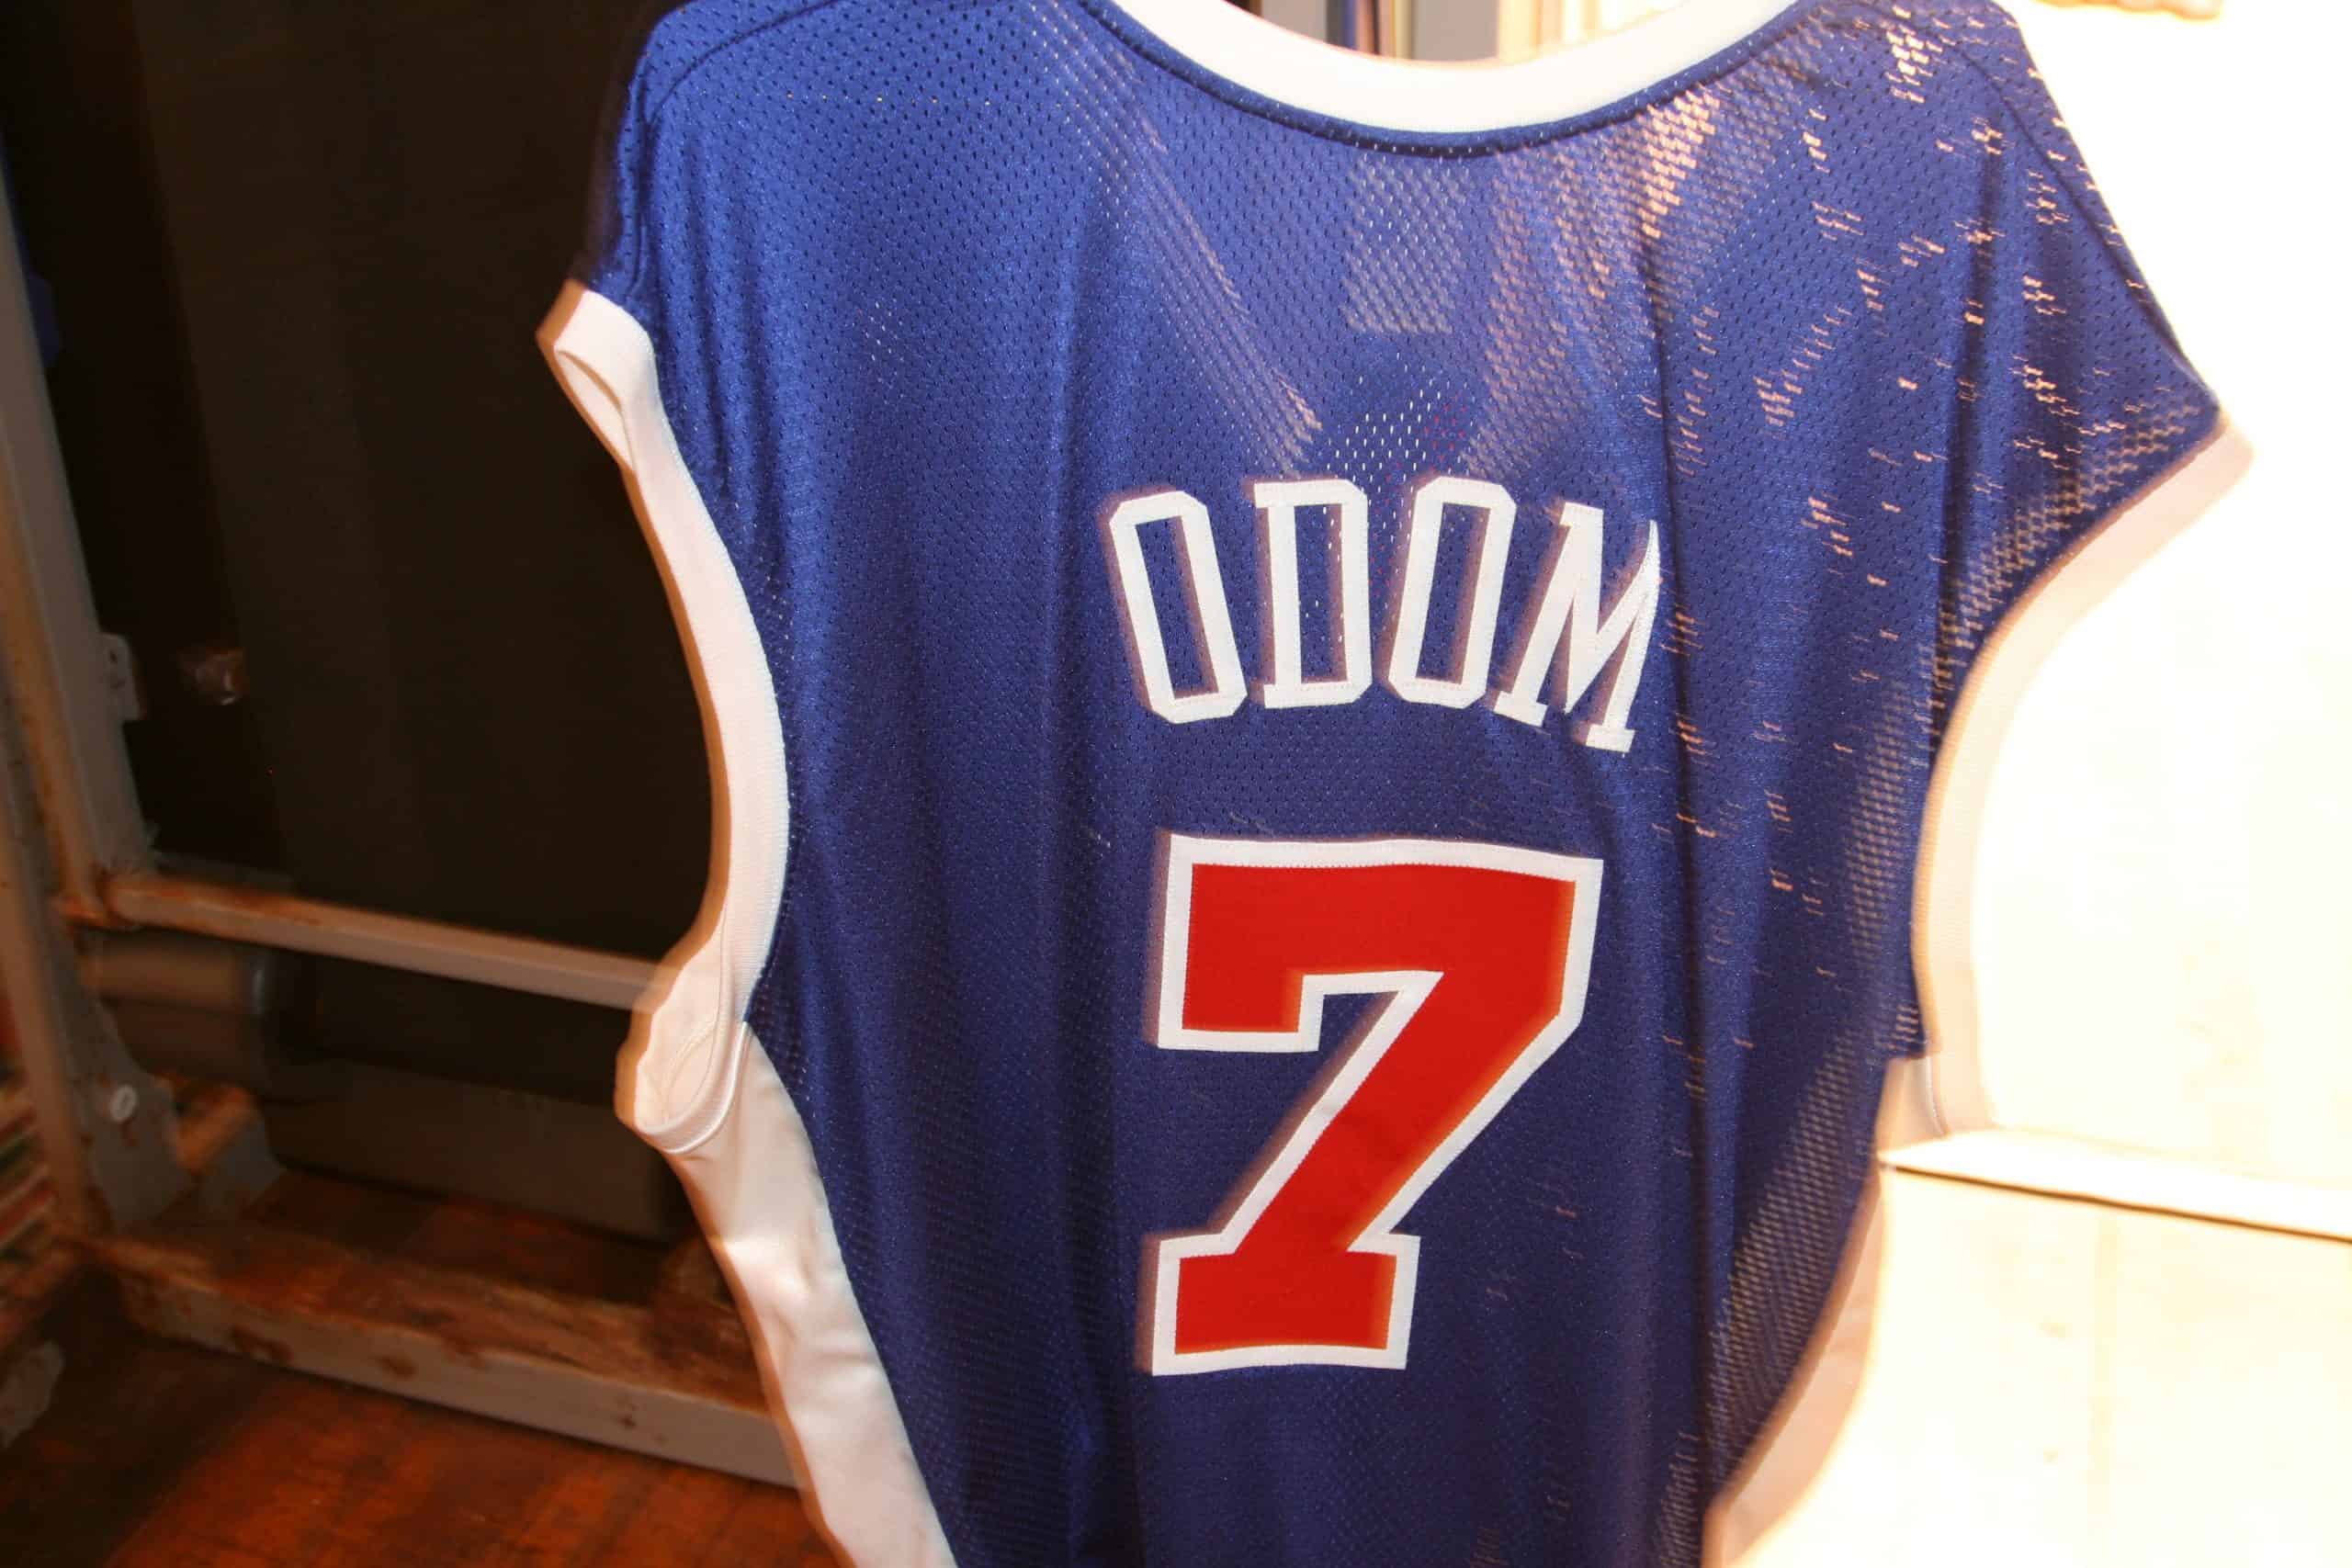 2002-03 Los Angeles Clippers Lamar Odom #7 Game Used Blue Jersey DP05028